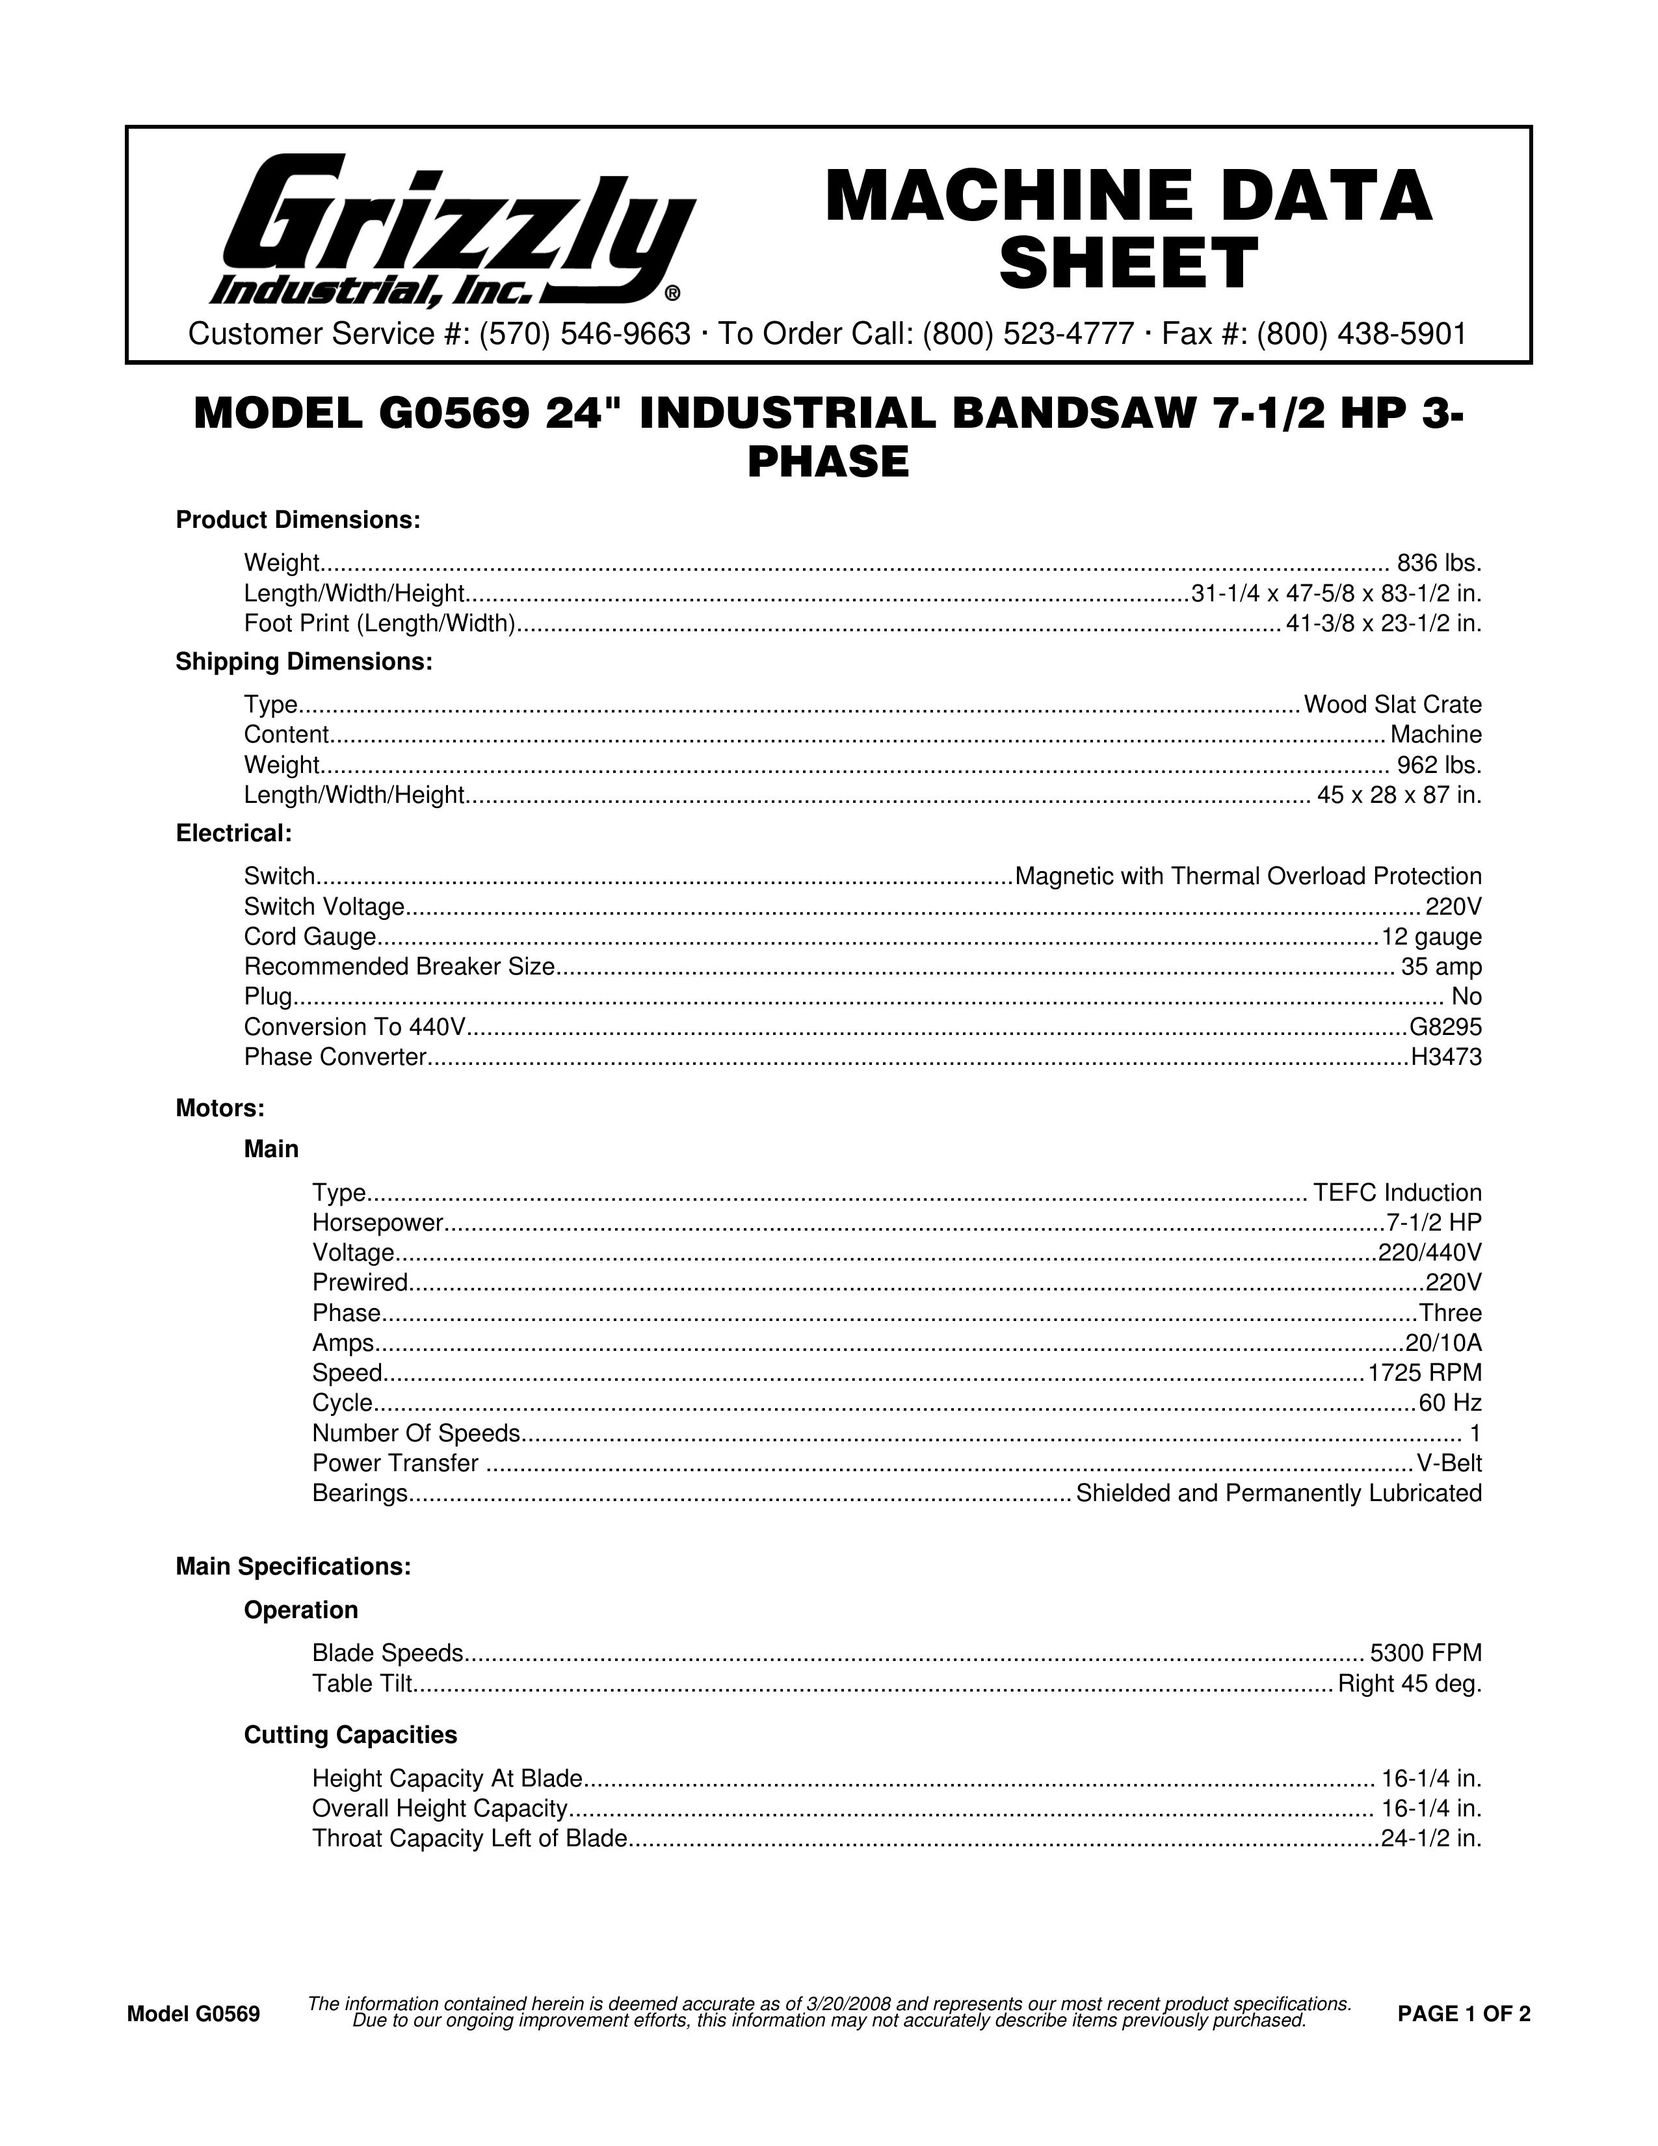 Grizzly DS275-18V Saw User Manual